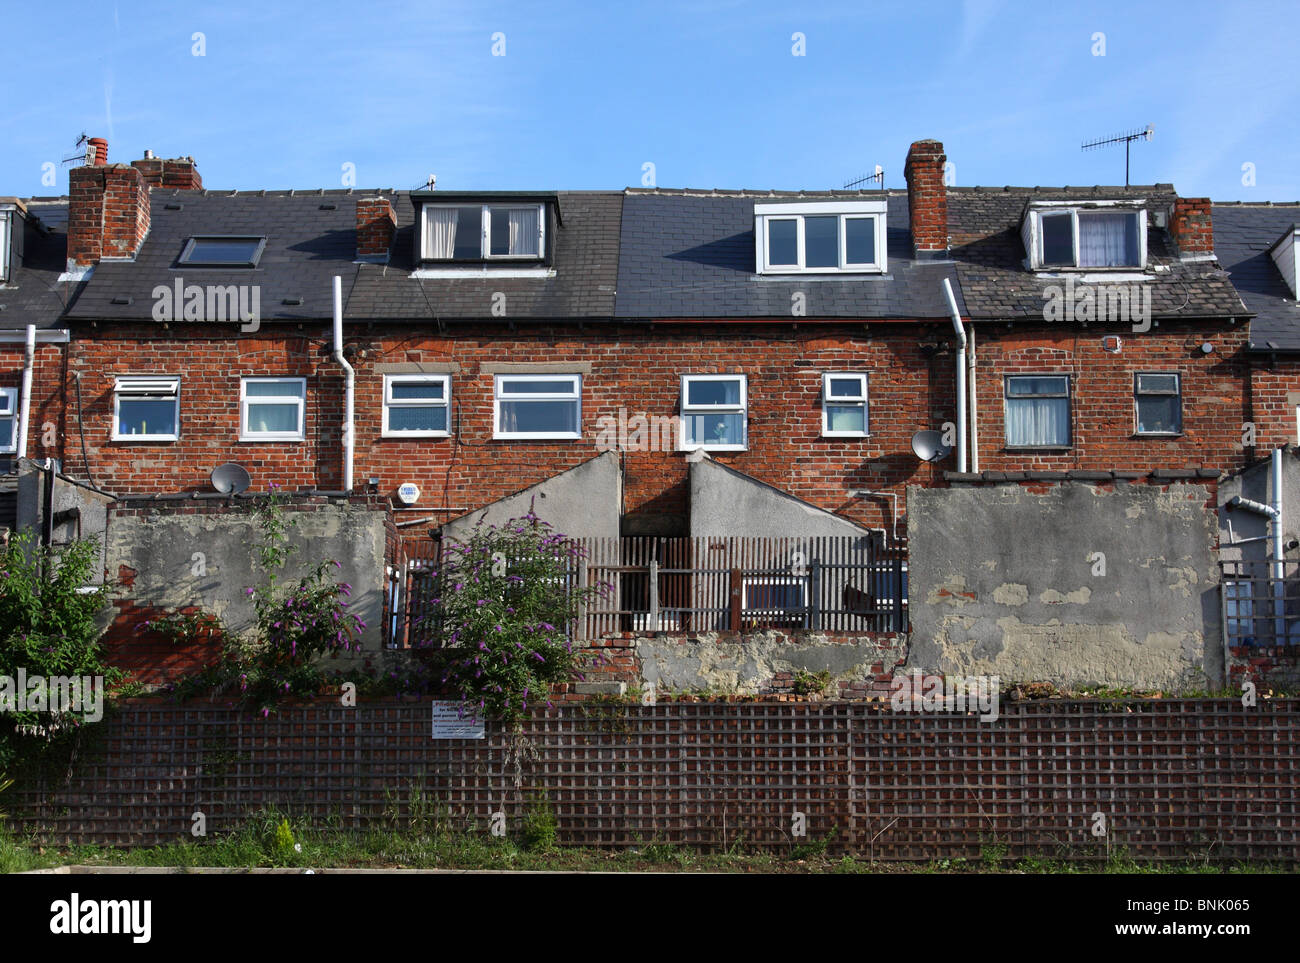 Terraced houses in a U.K. city. Stock Photo